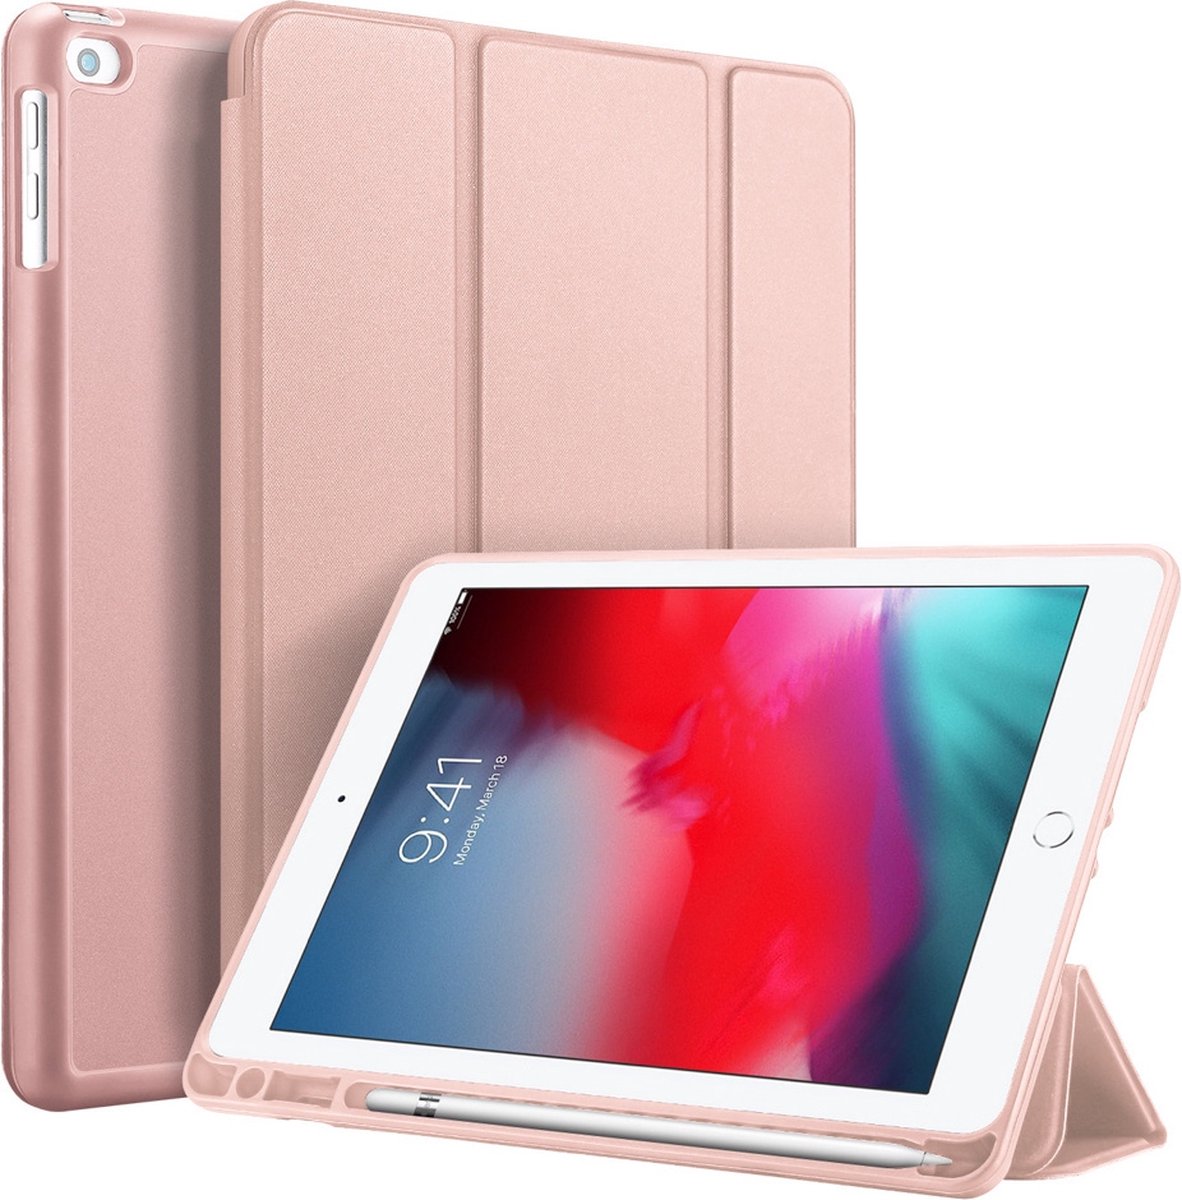 Accezz Tablet Hoes Geschikt voor iPad 2017 (5e generatie) / iPad 6e generatie (2018) / iPad Air / iPad Air 2 - Accezz Smart Silicone Bookcase - Roze / Rose goud